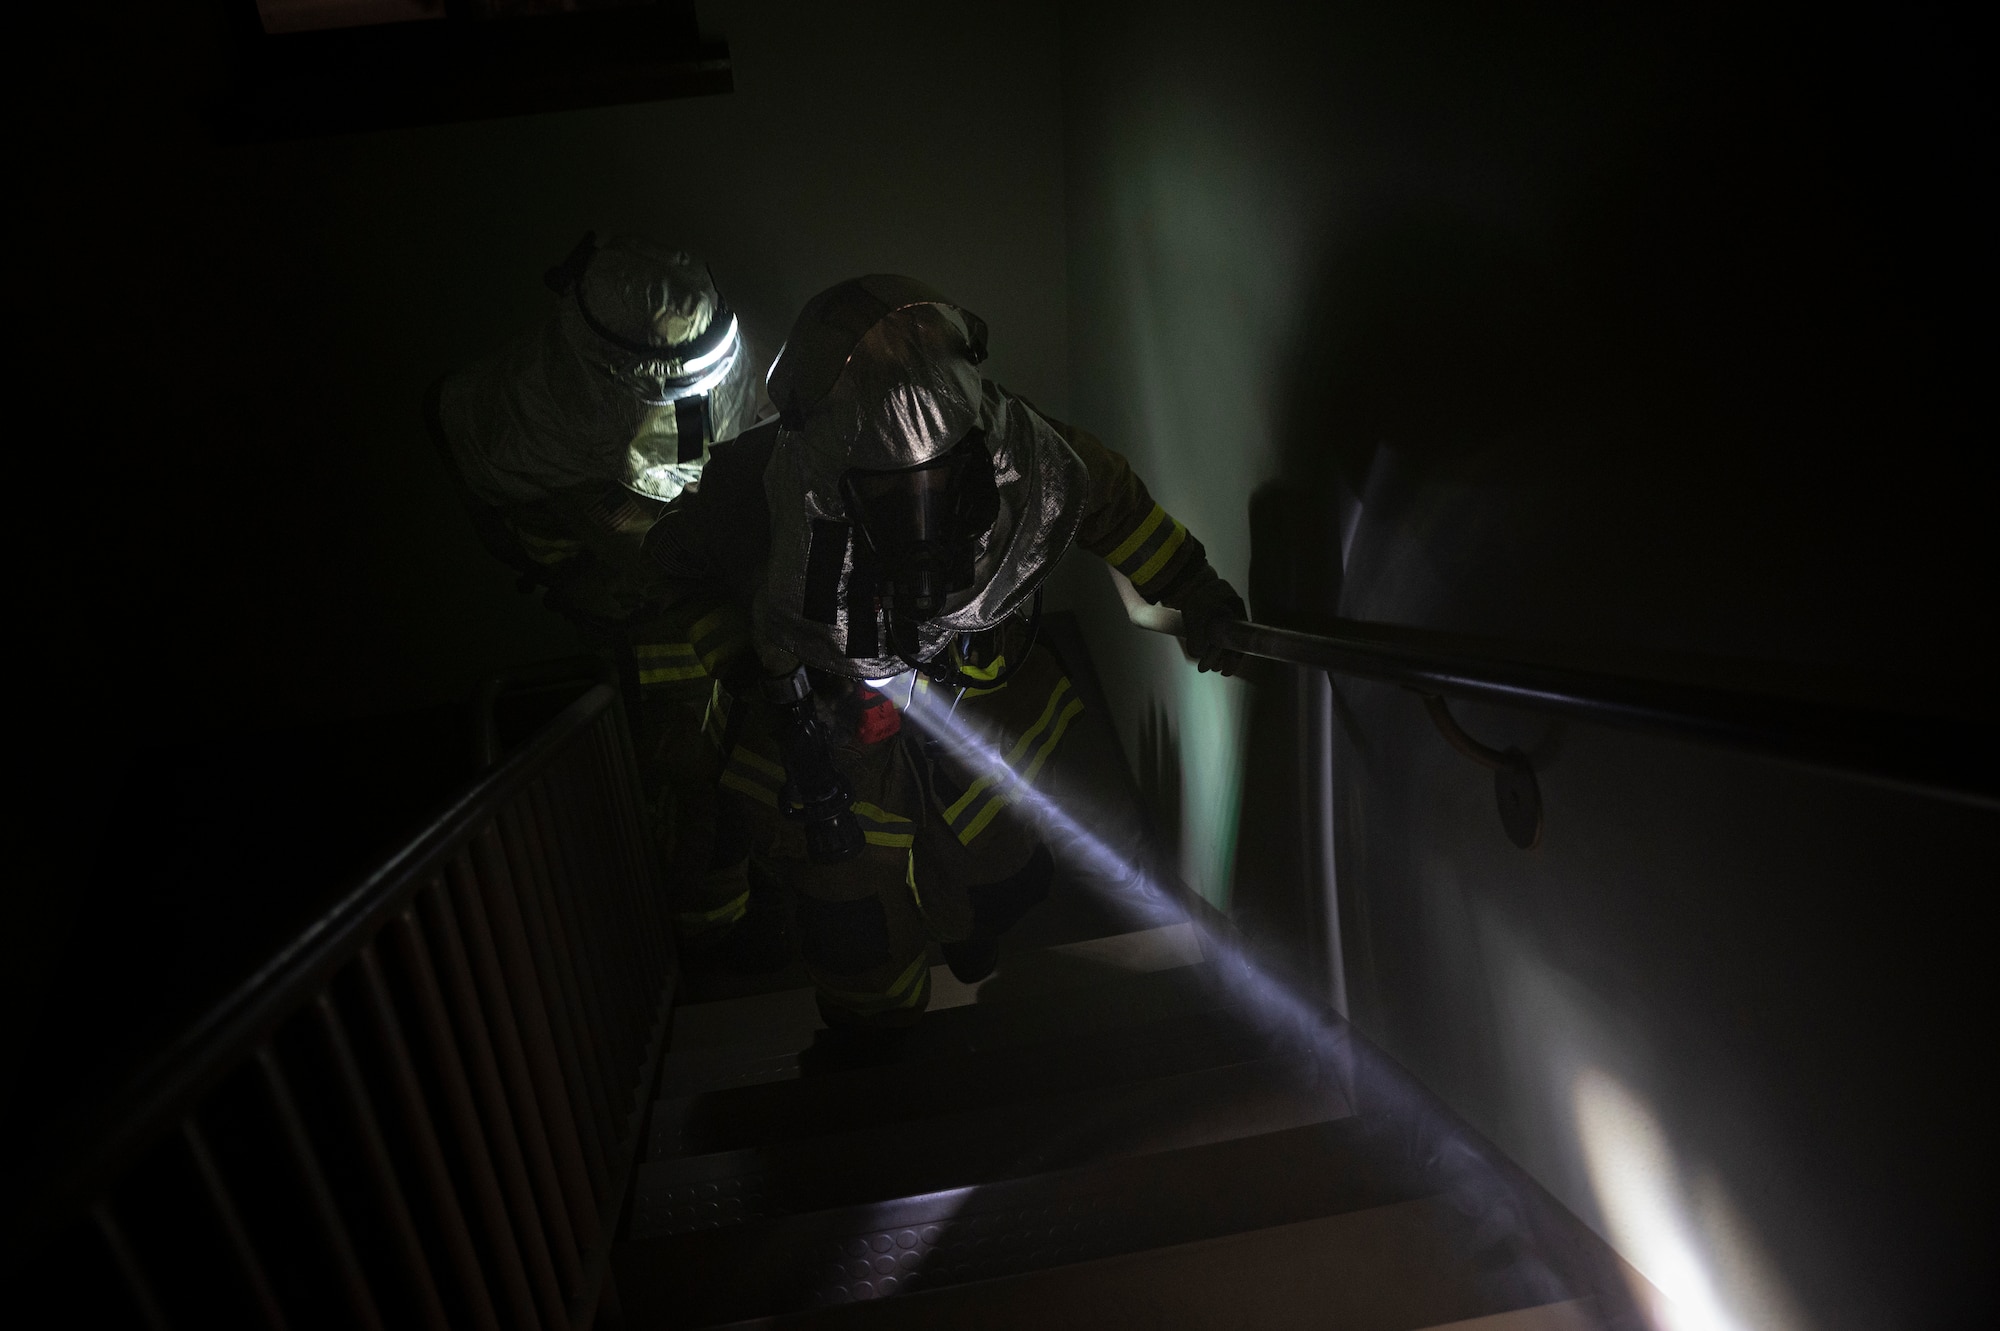 U.S. Air Force Airman 1st Class Joey Vue and U.S. Air Force Staff Sgt. Larry McIver, 51st Civil Engineer Squadron firefighters, enter a simulated burning building during a fire response training scenario at Osan Air Base, Republic of Korea, Sept. 14, 2022.